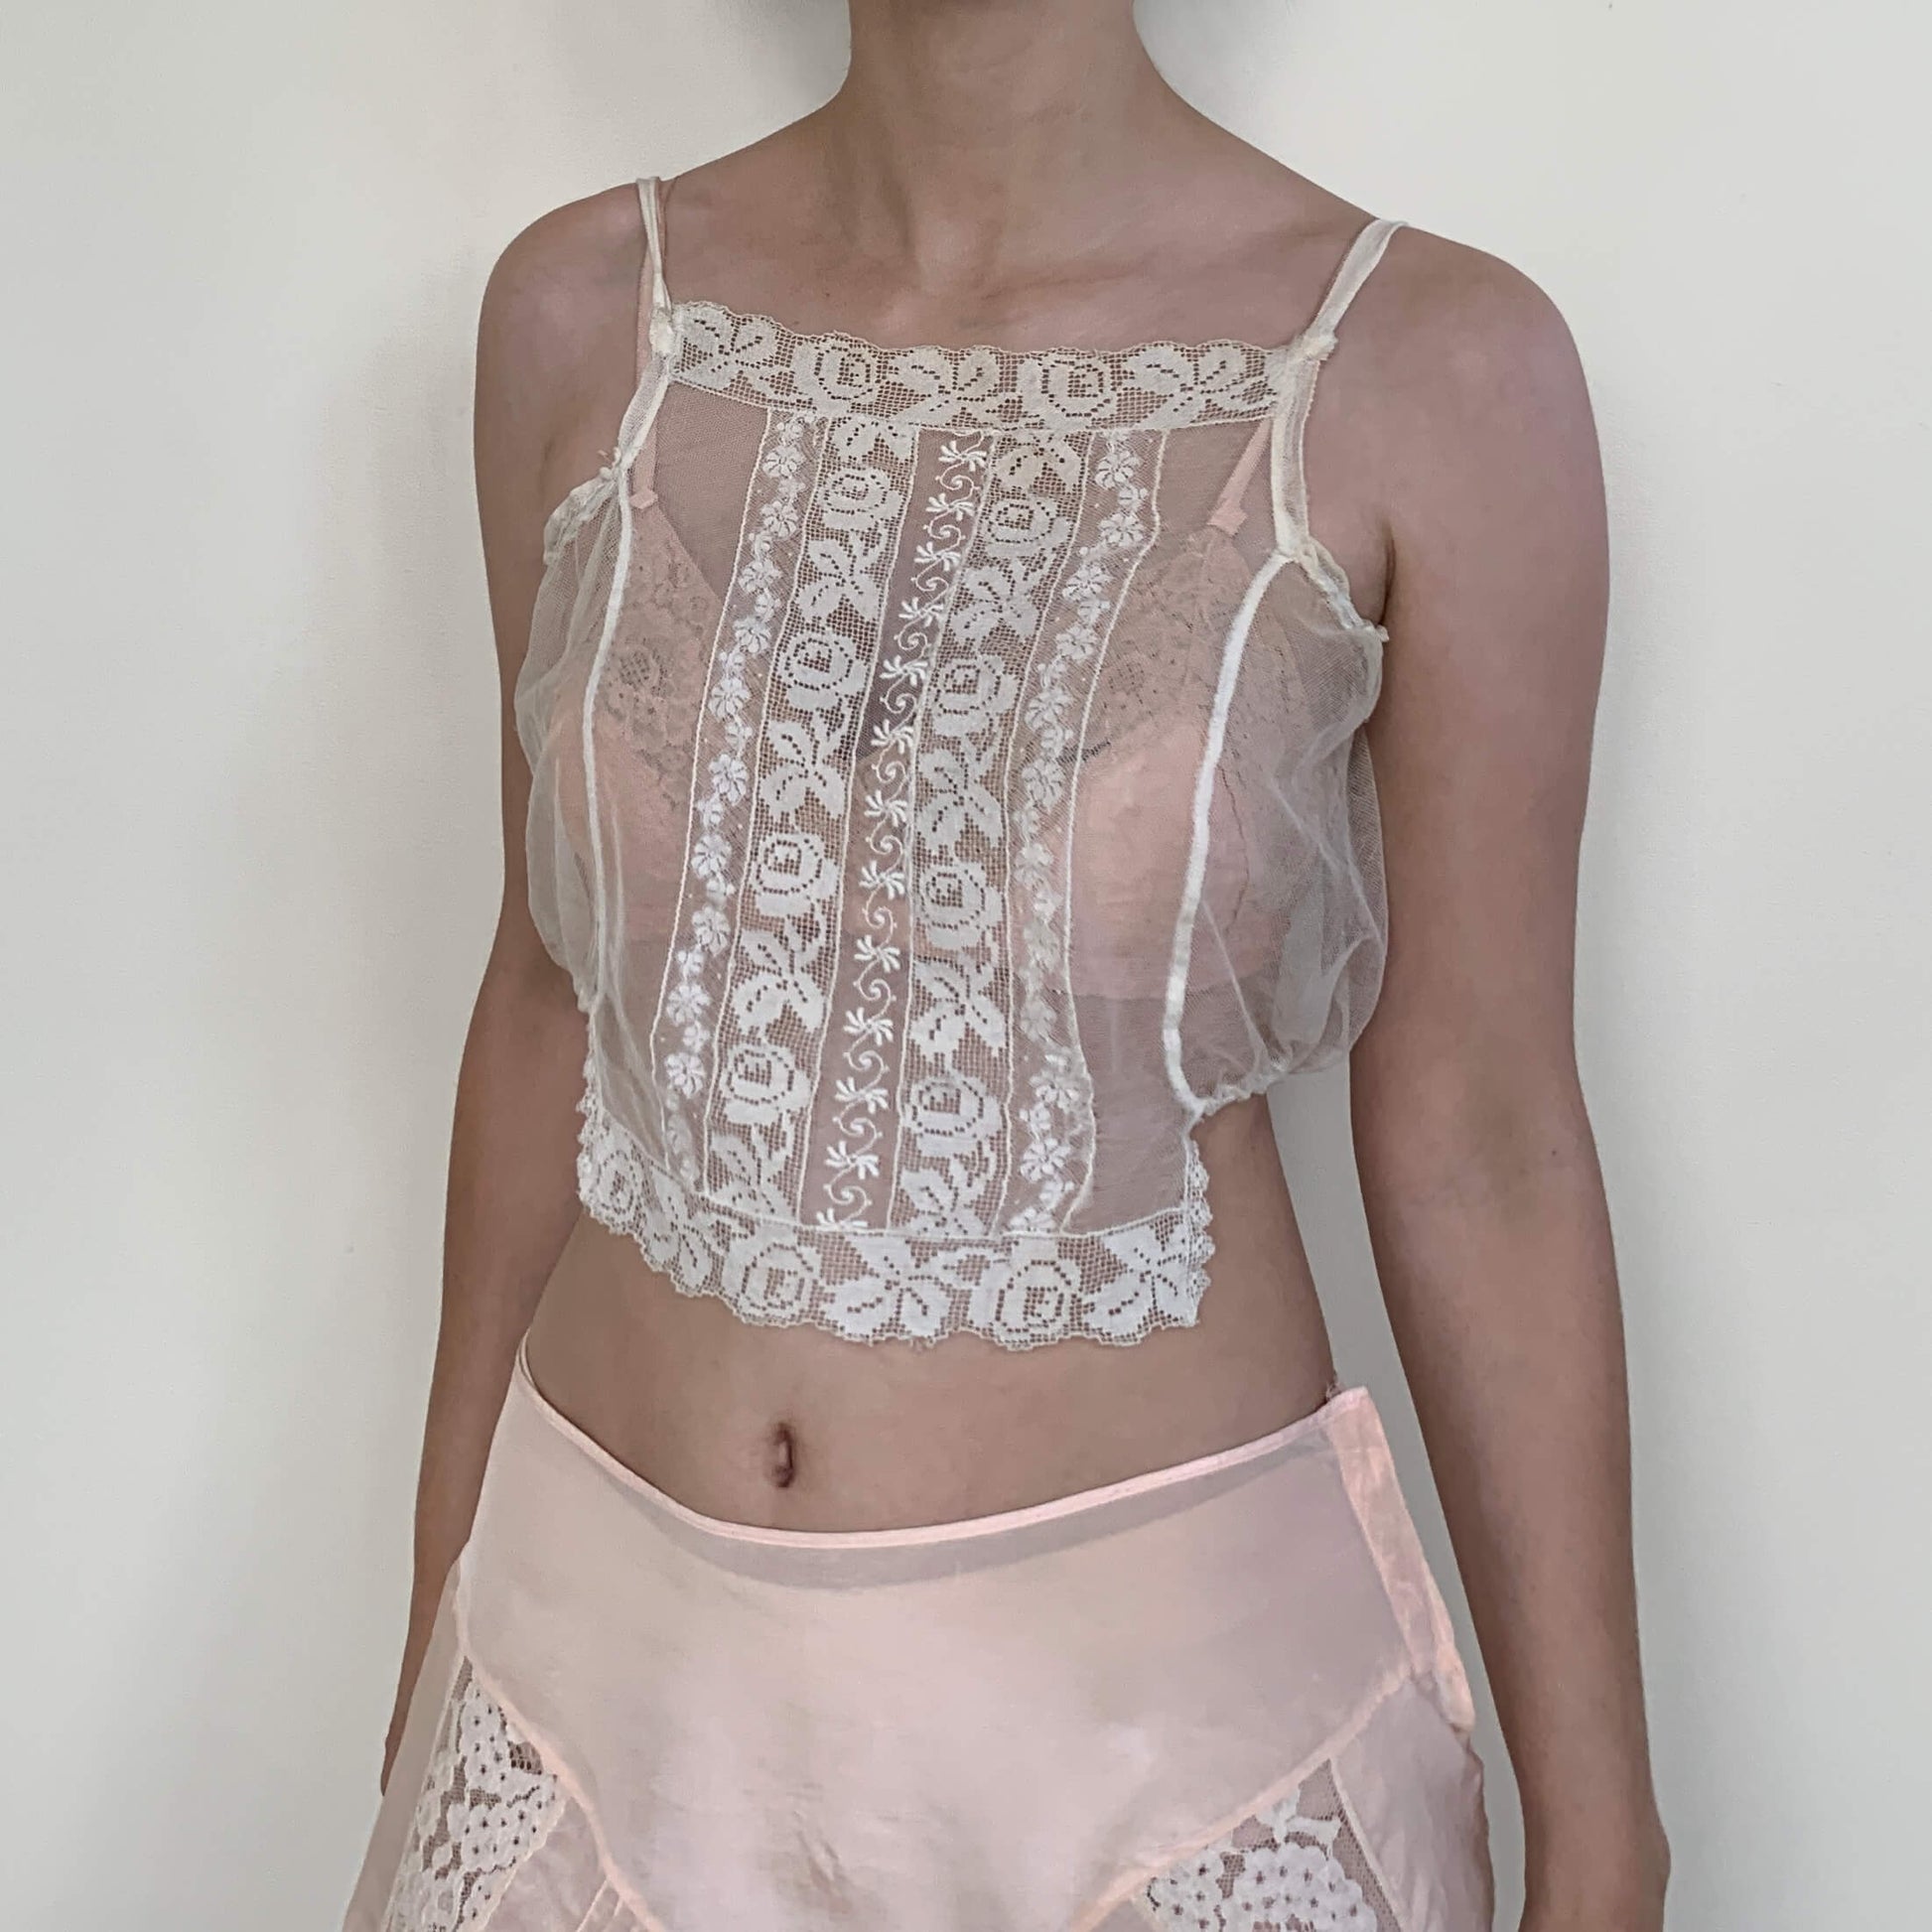 sheer camisole made of floral lace on model